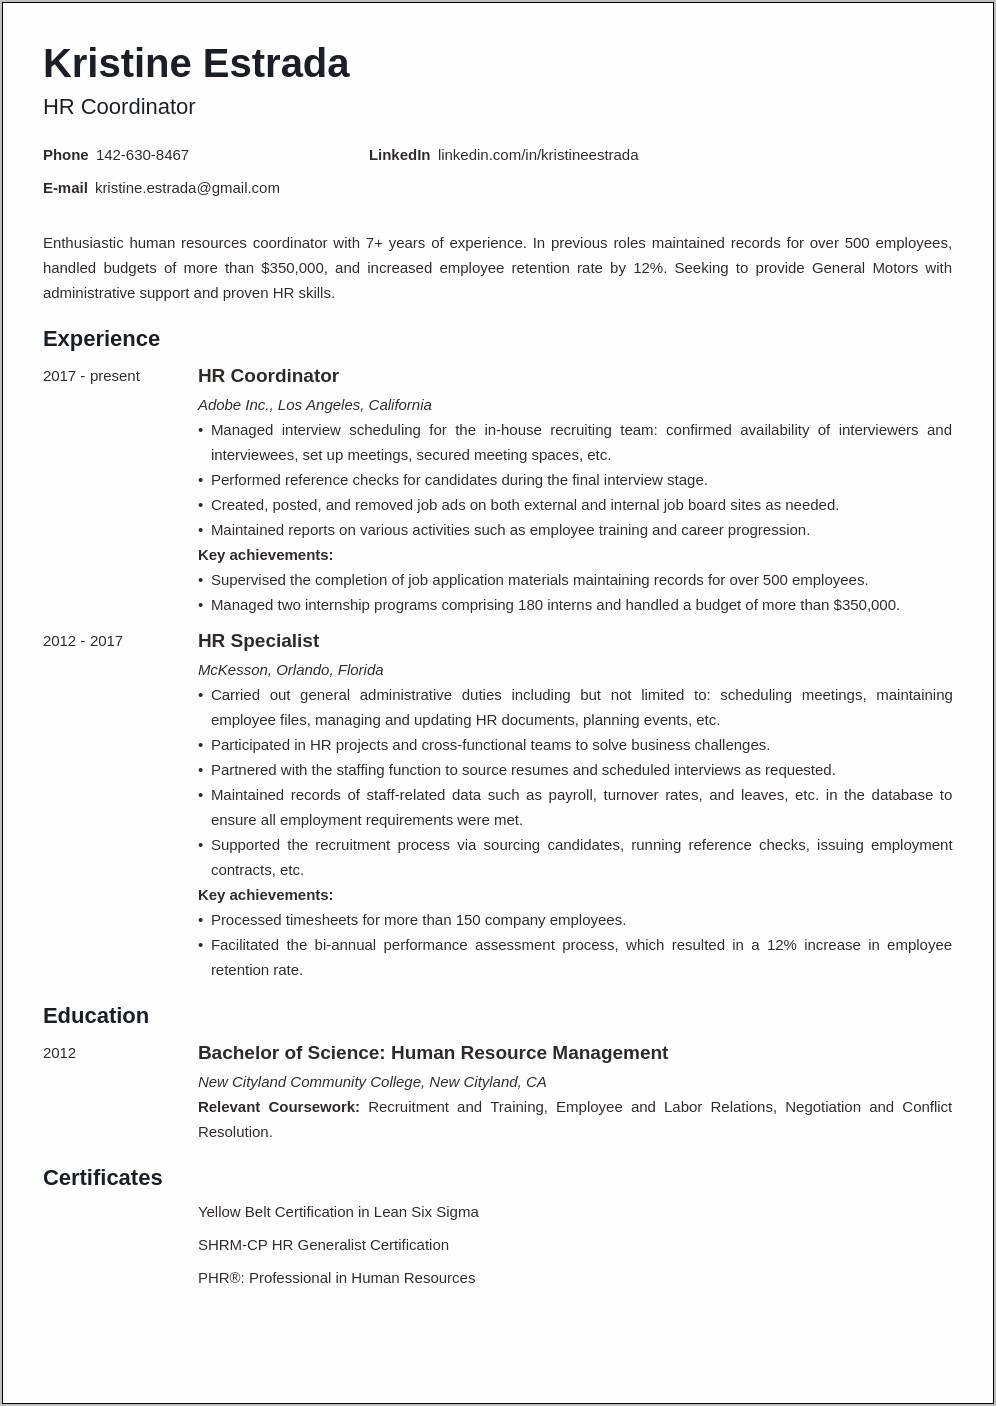 Hr Coordinator Resume Sample For 2 Years Experience